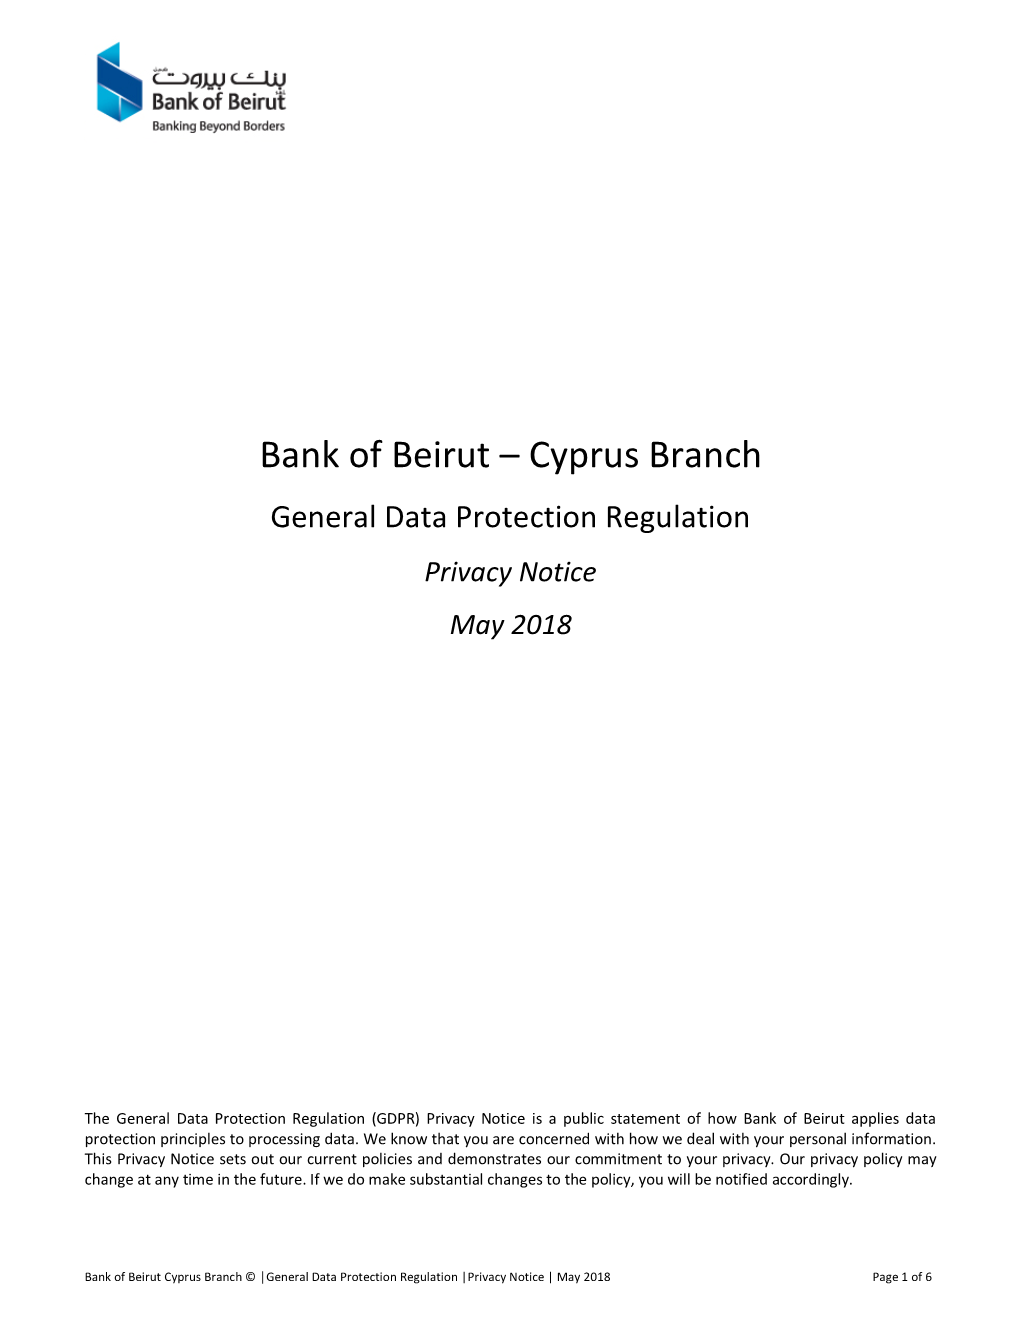 Bank of Beirut – Cyprus Branch General Data Protection Regulation Privacy Notice May 2018